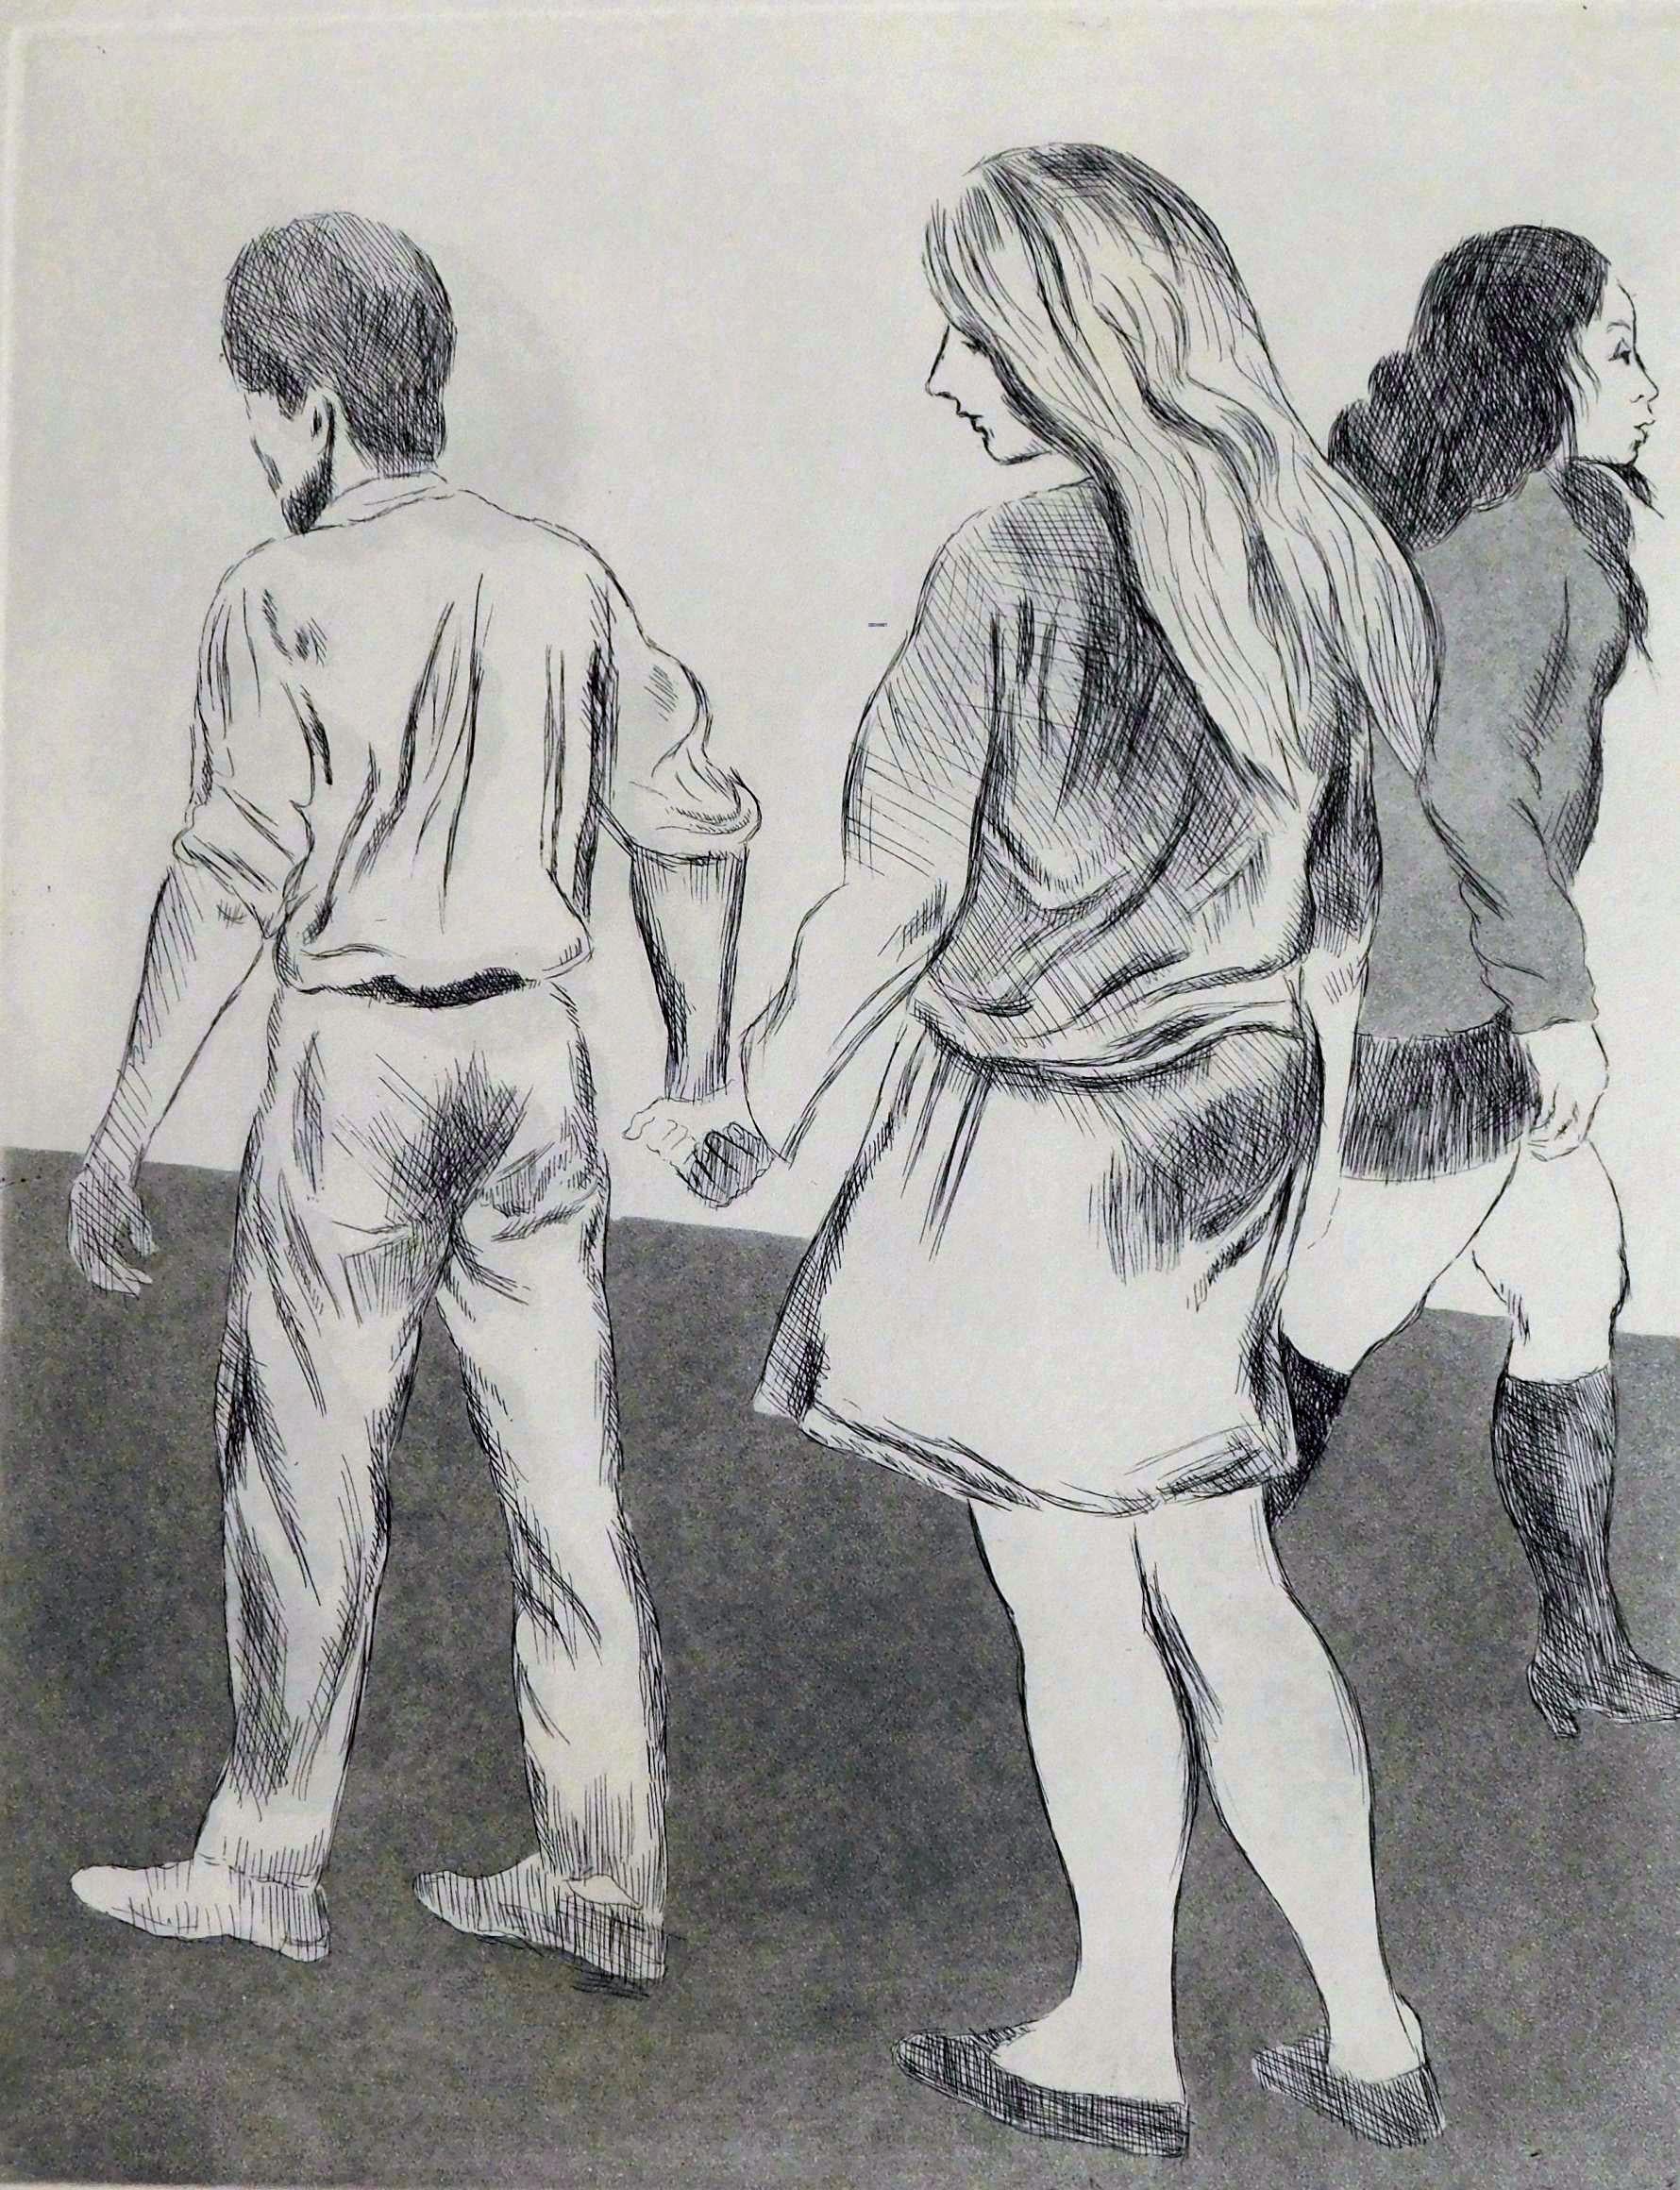 Original etching by Russian born New York artist Raphael Soyer (1899-1987).
Beautiful composition. A pair of lovers holding hands. Created in the 1970's
Edition size: 250. In excellent condition. Matted and unframed.
In pencil lower left: 90/250.